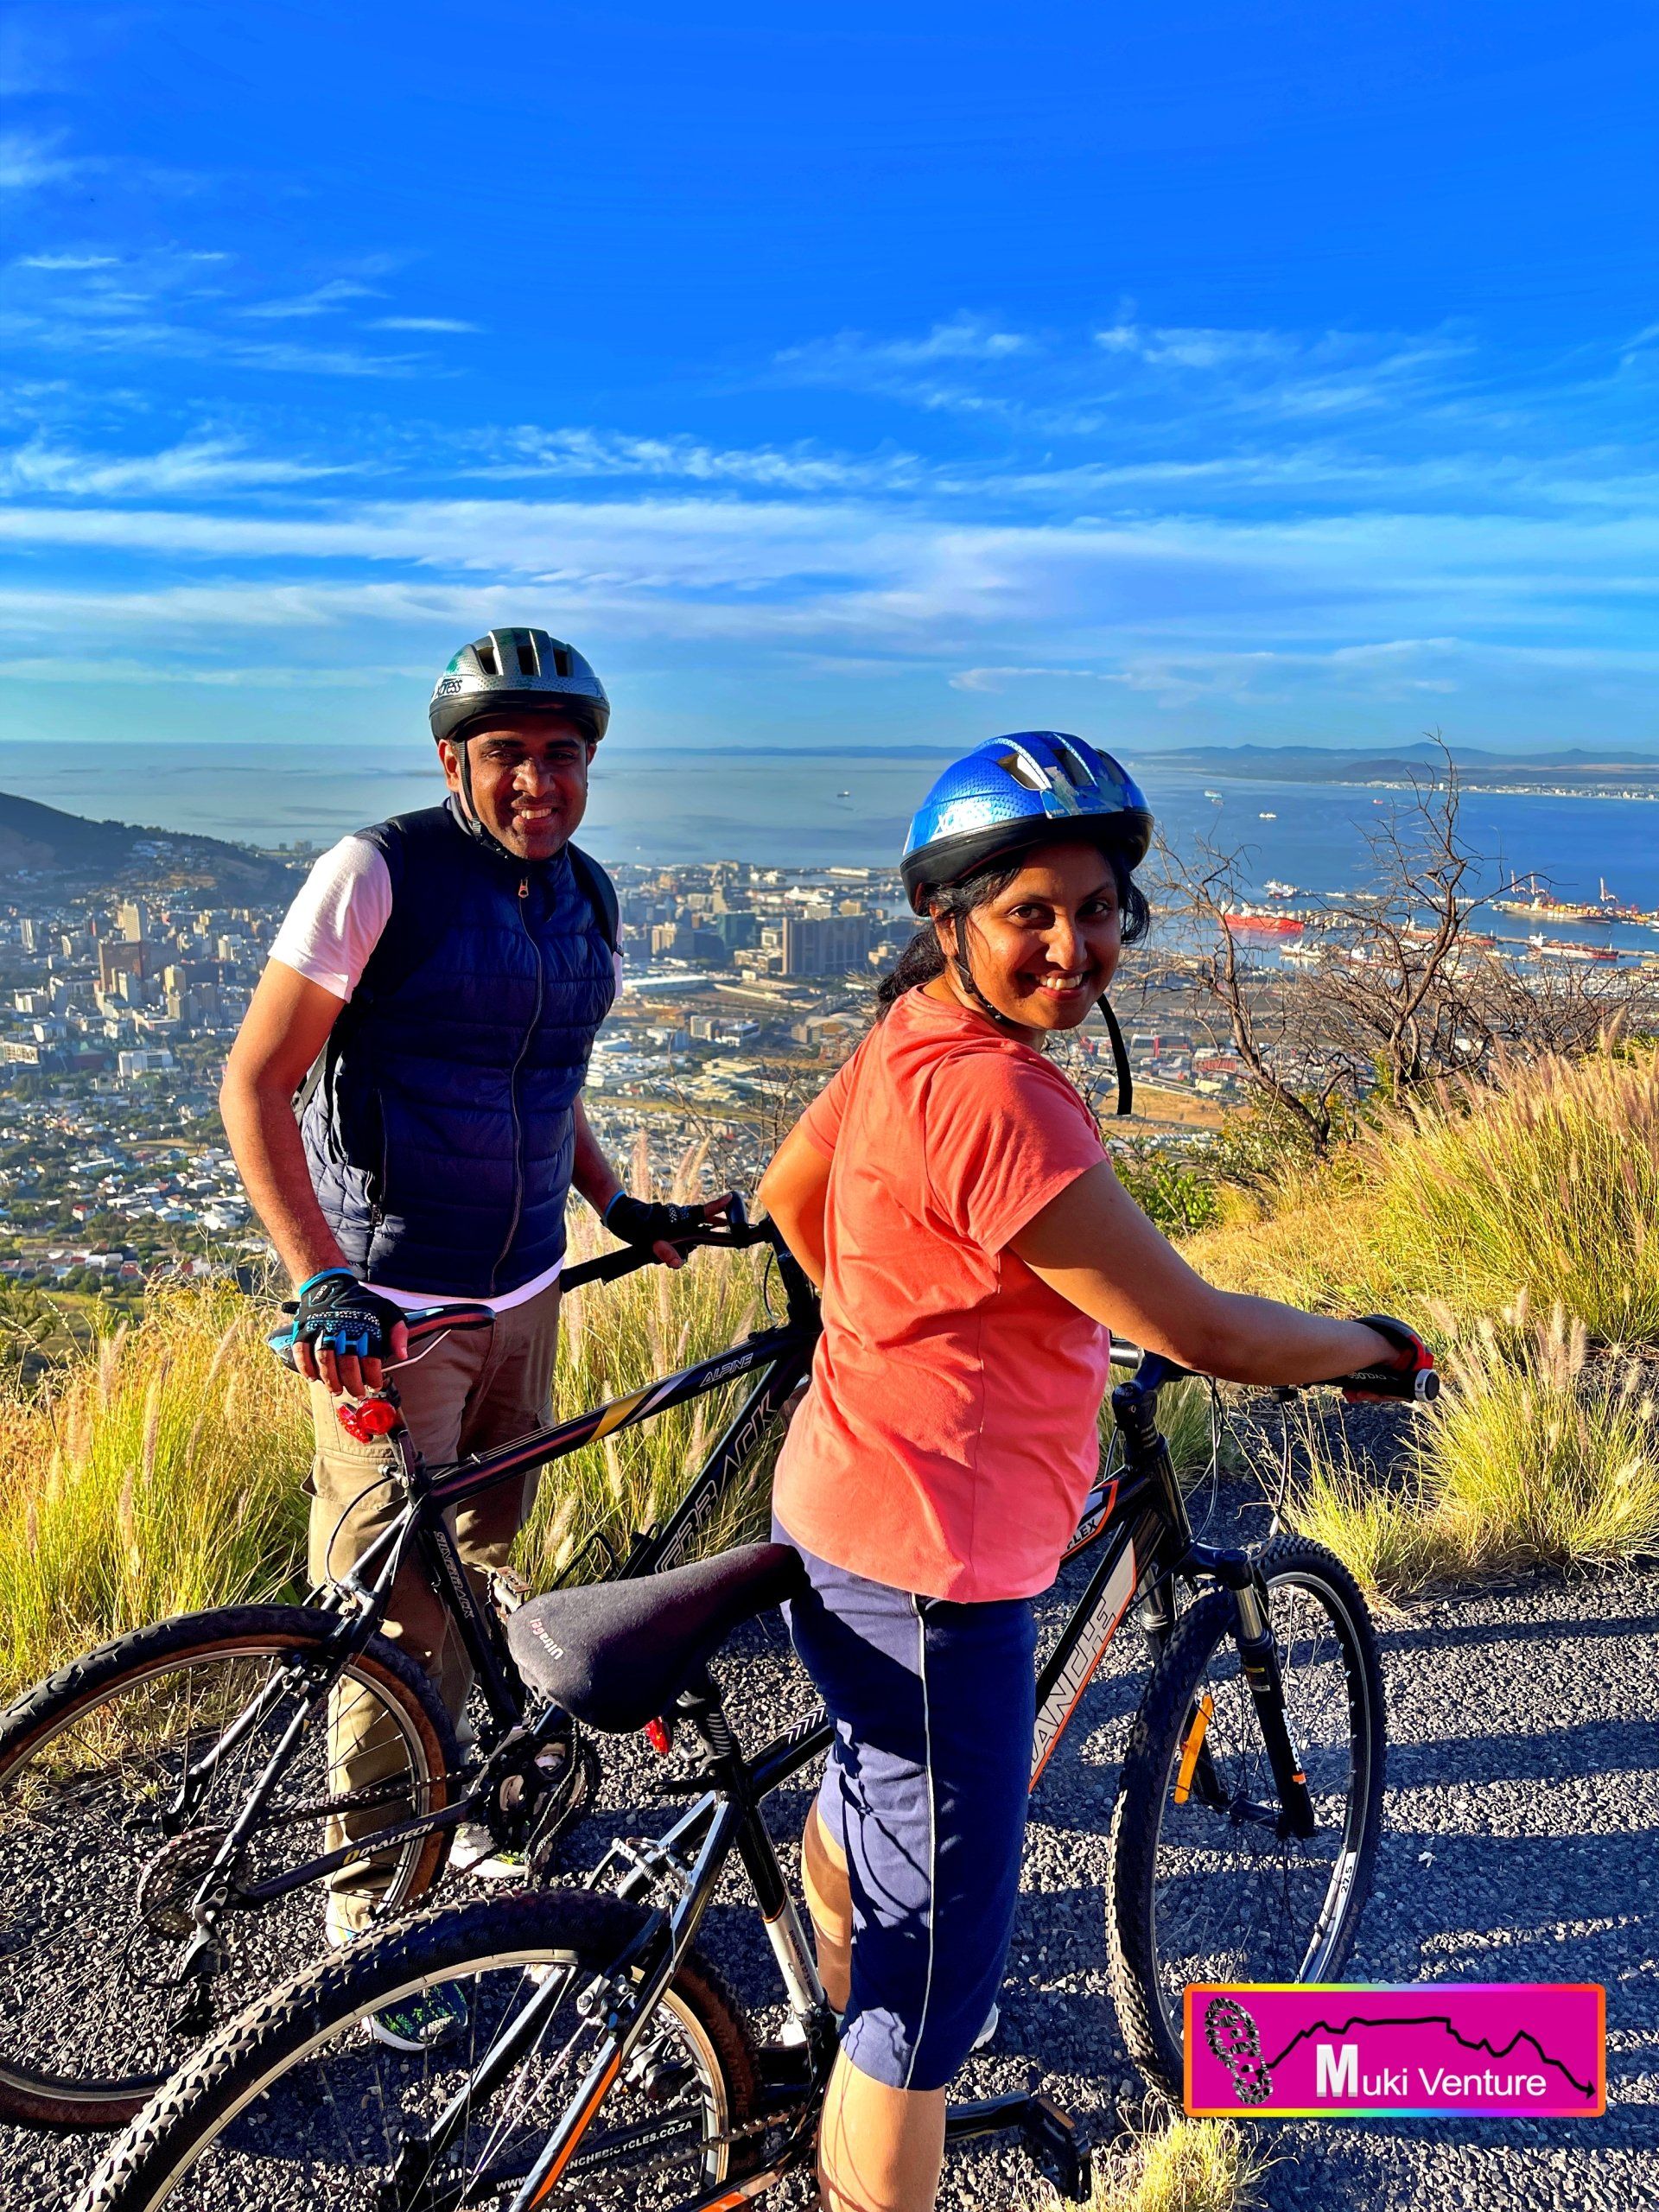 The image shows a couple on a mountain bike tour in a picturesque and mountainous landscape. The couple is standing next to their bikes, both wearing cycling gear and helmets. They appear to be taking a break and enjoying the scenic view, as they stand on a path surrounded by lush green trees and beautiful rolling hills. The couple seems to be in good spirits, with smiles on their faces, suggesting that they are having a great time. The sunlight filters through the tree leaves, creating a warm and inviting atmosphere. The mountains in the background provide a majestic backdrop to the scene, enhancing the feeling of adventure and exploration. Overall, the image portrays a couple embracing the joy and excitement of a mountain bike tour, surrounded by the beauty of nature.